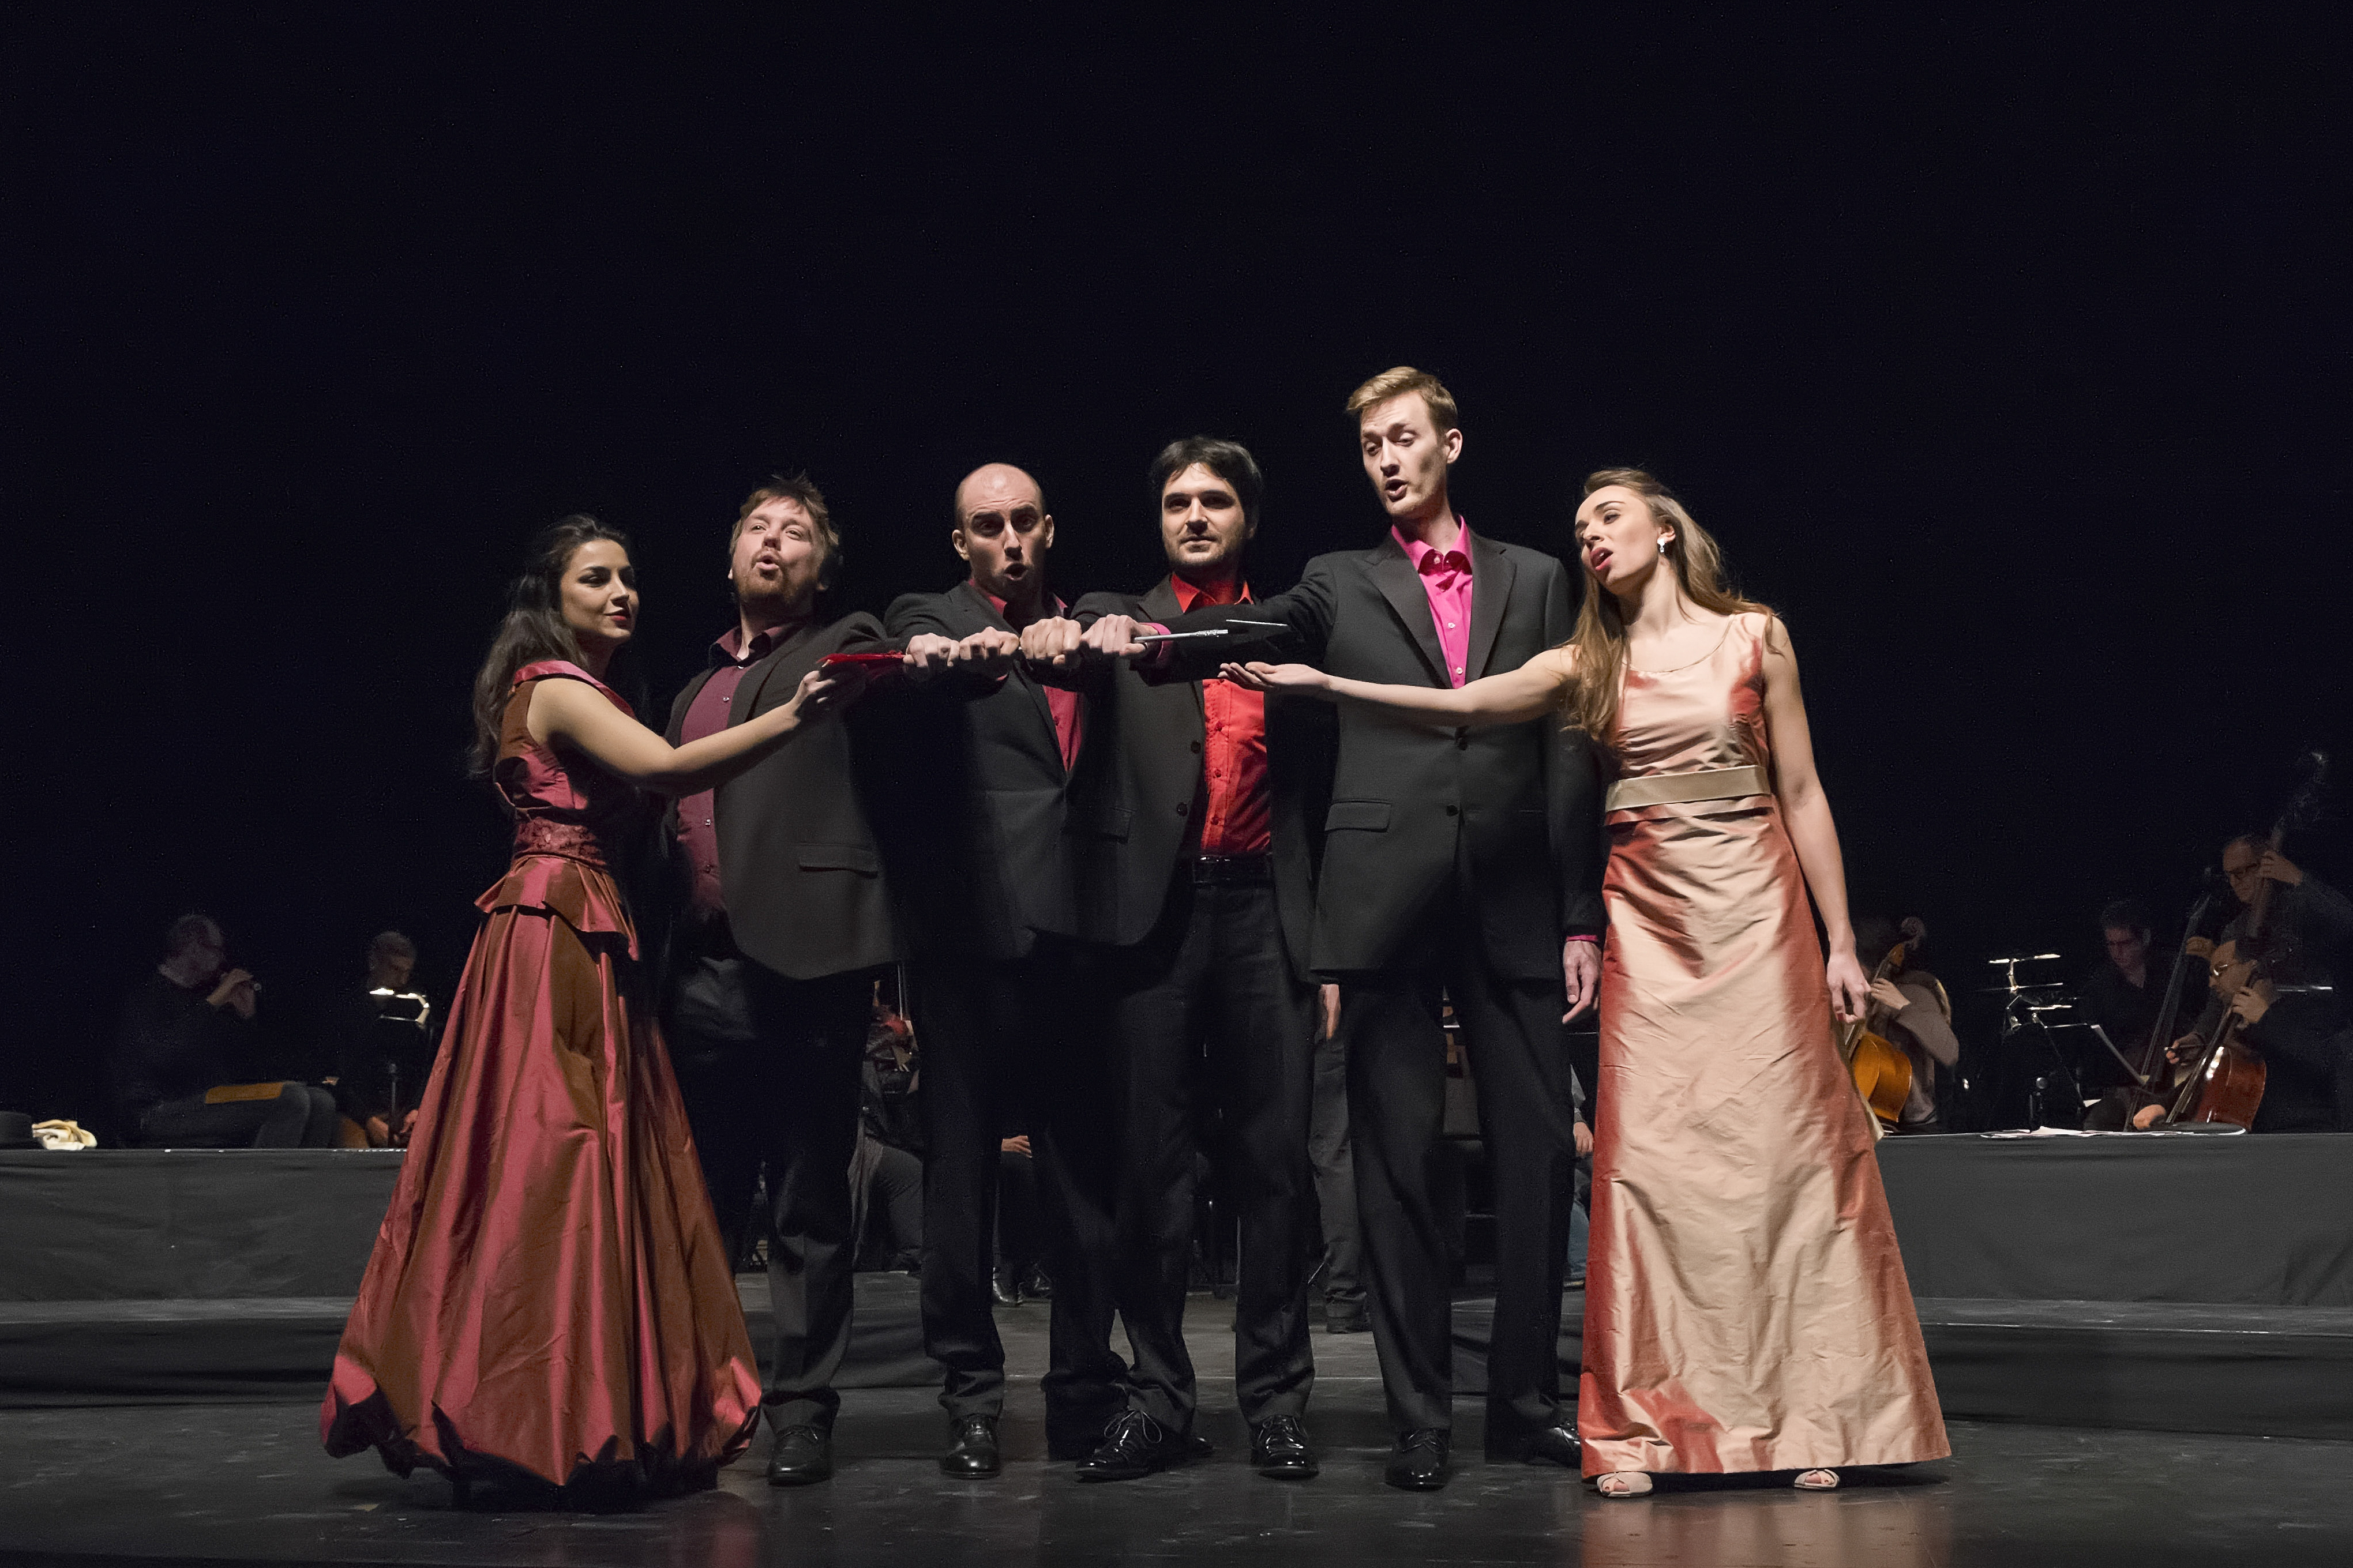 The six soloists from Le Jardin des Voix Academy. All have phenomenal voices and showed an impressive command of the Italian lyrics and a vivid stage presence. Photo: Philippe Delval